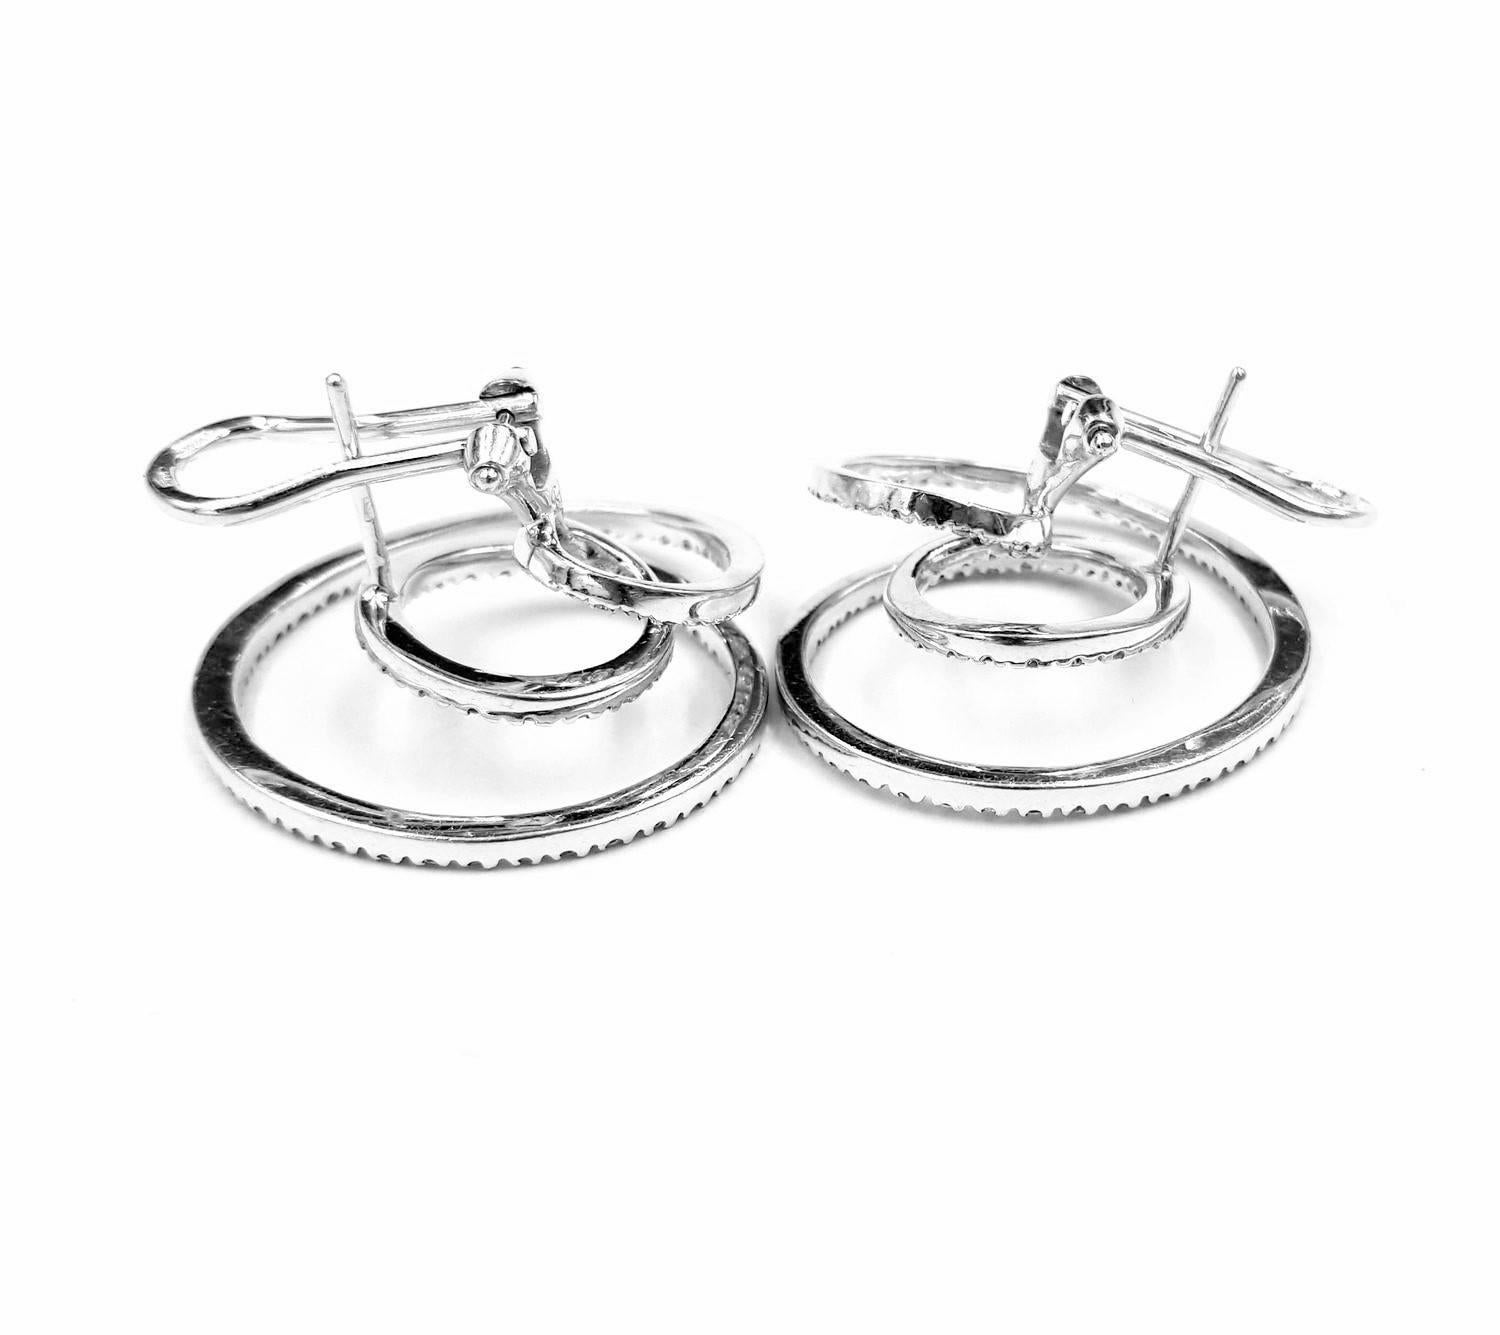 Tous Lyra Italy Swirl 3.50 Carats of Diamonds Set in 18kt White Gold Earrings For Sale 3